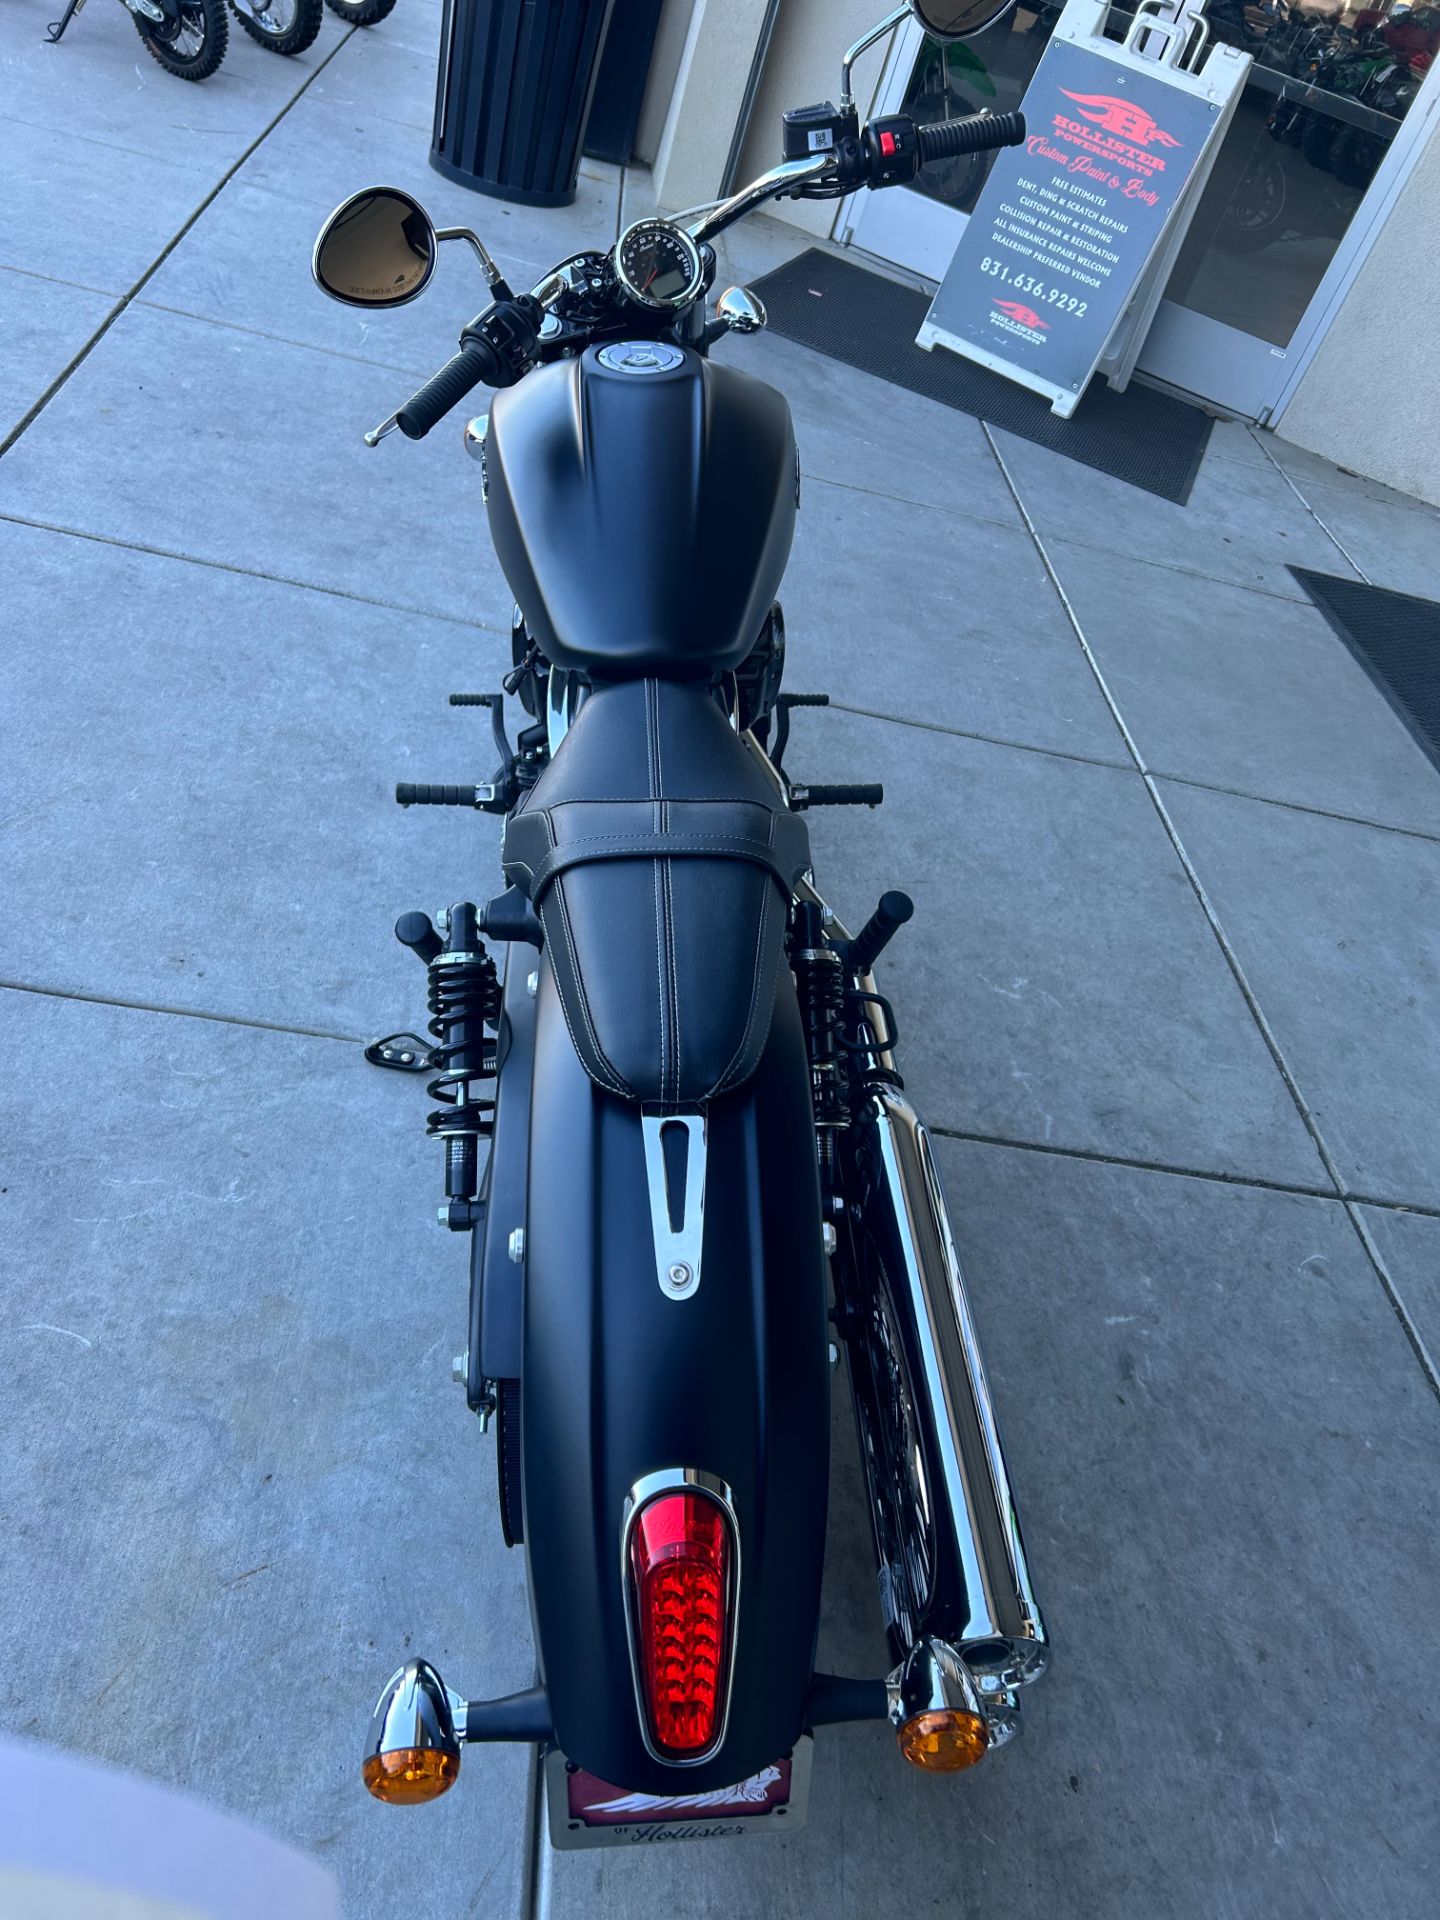 2022 Indian Motorcycle Scout® ABS in Hollister, California - Photo 4